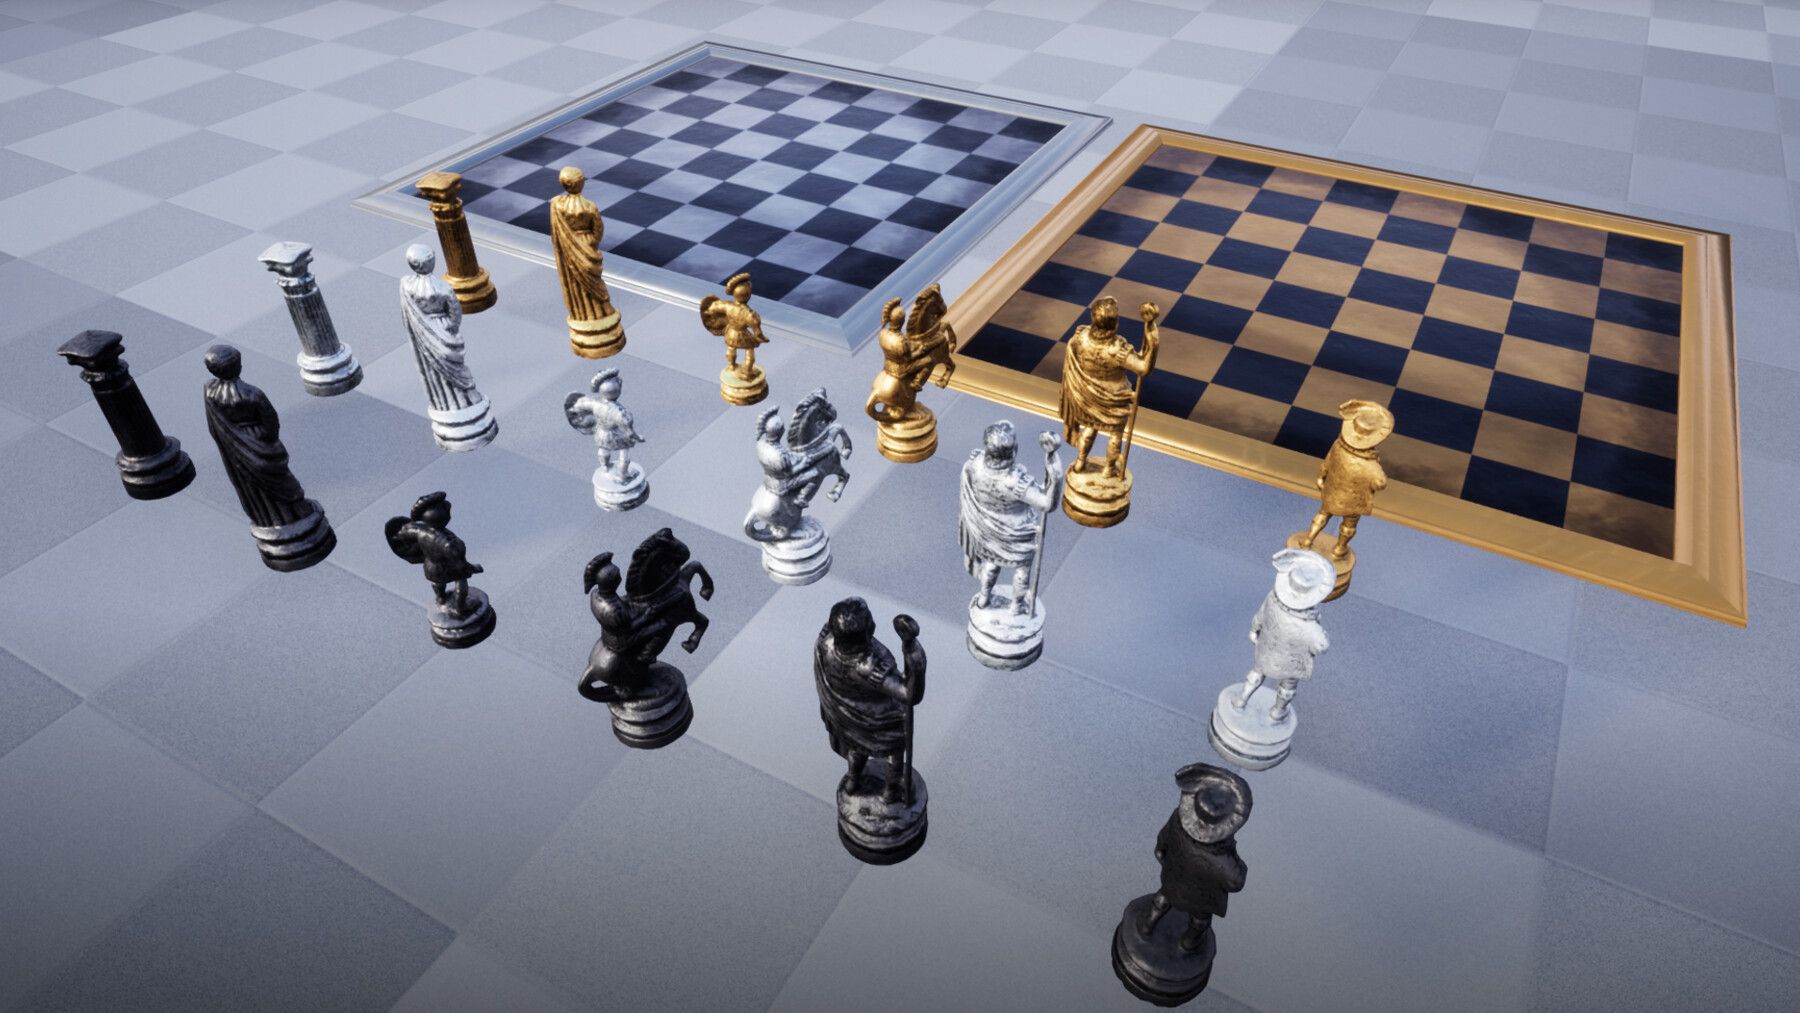 Chess Board Game in Props - UE Marketplace